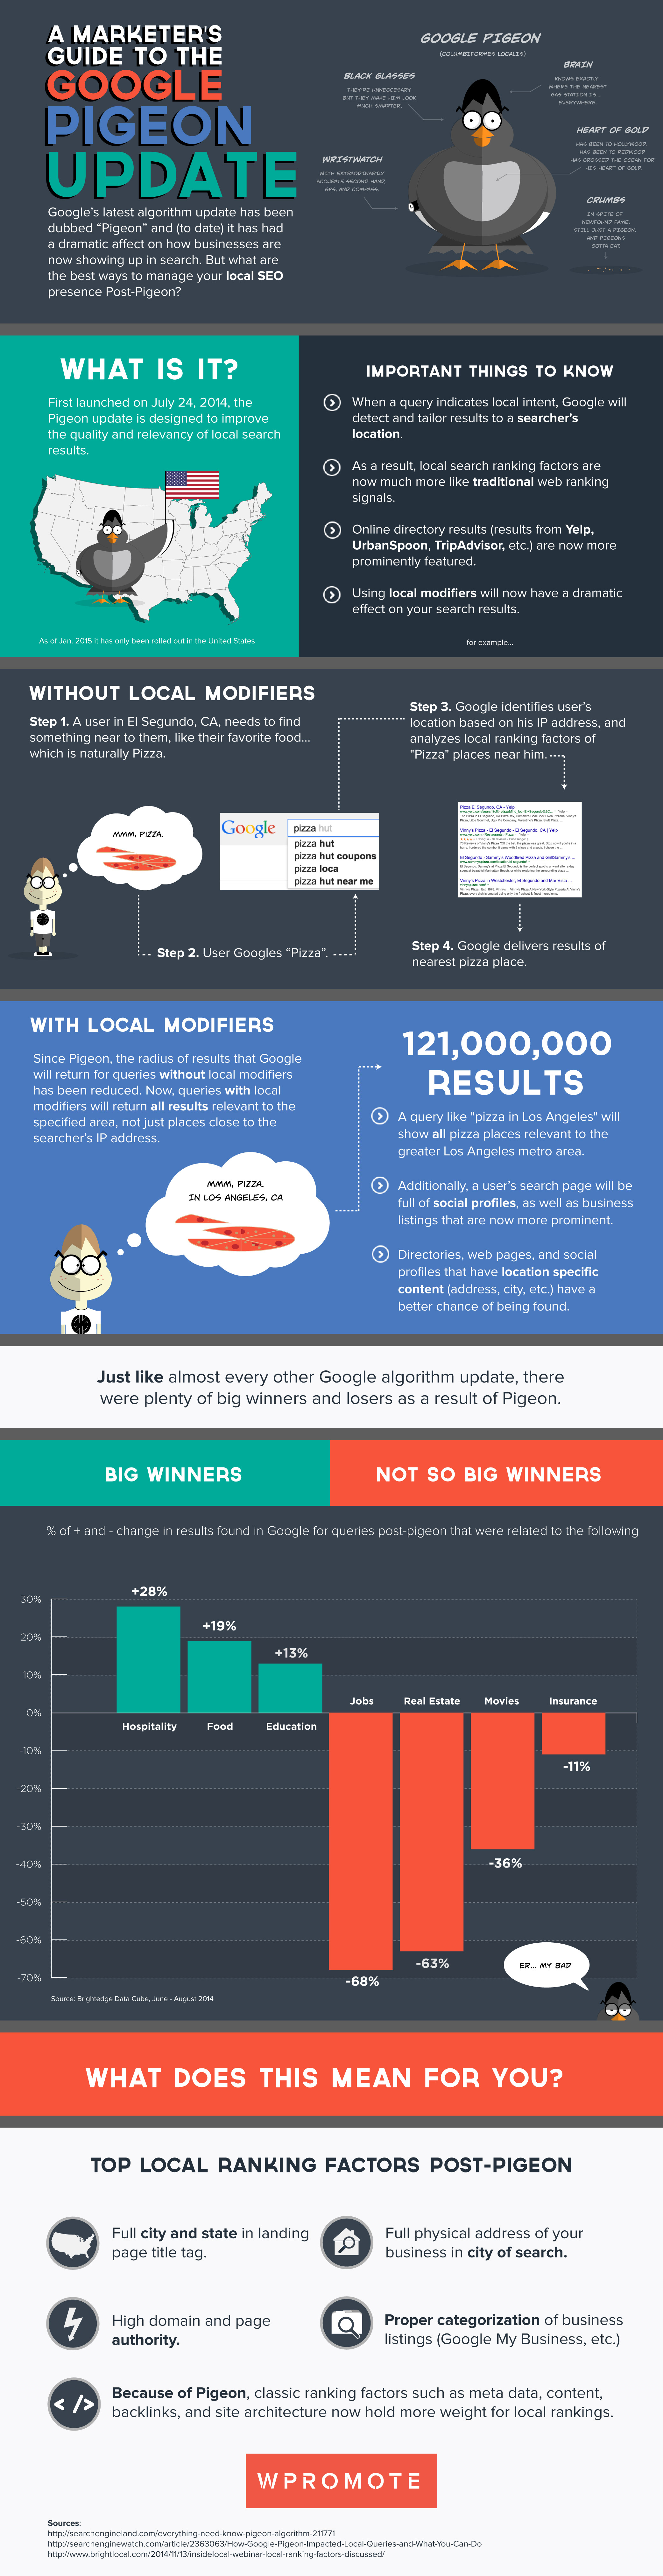 marketers-guide-google-pigeon